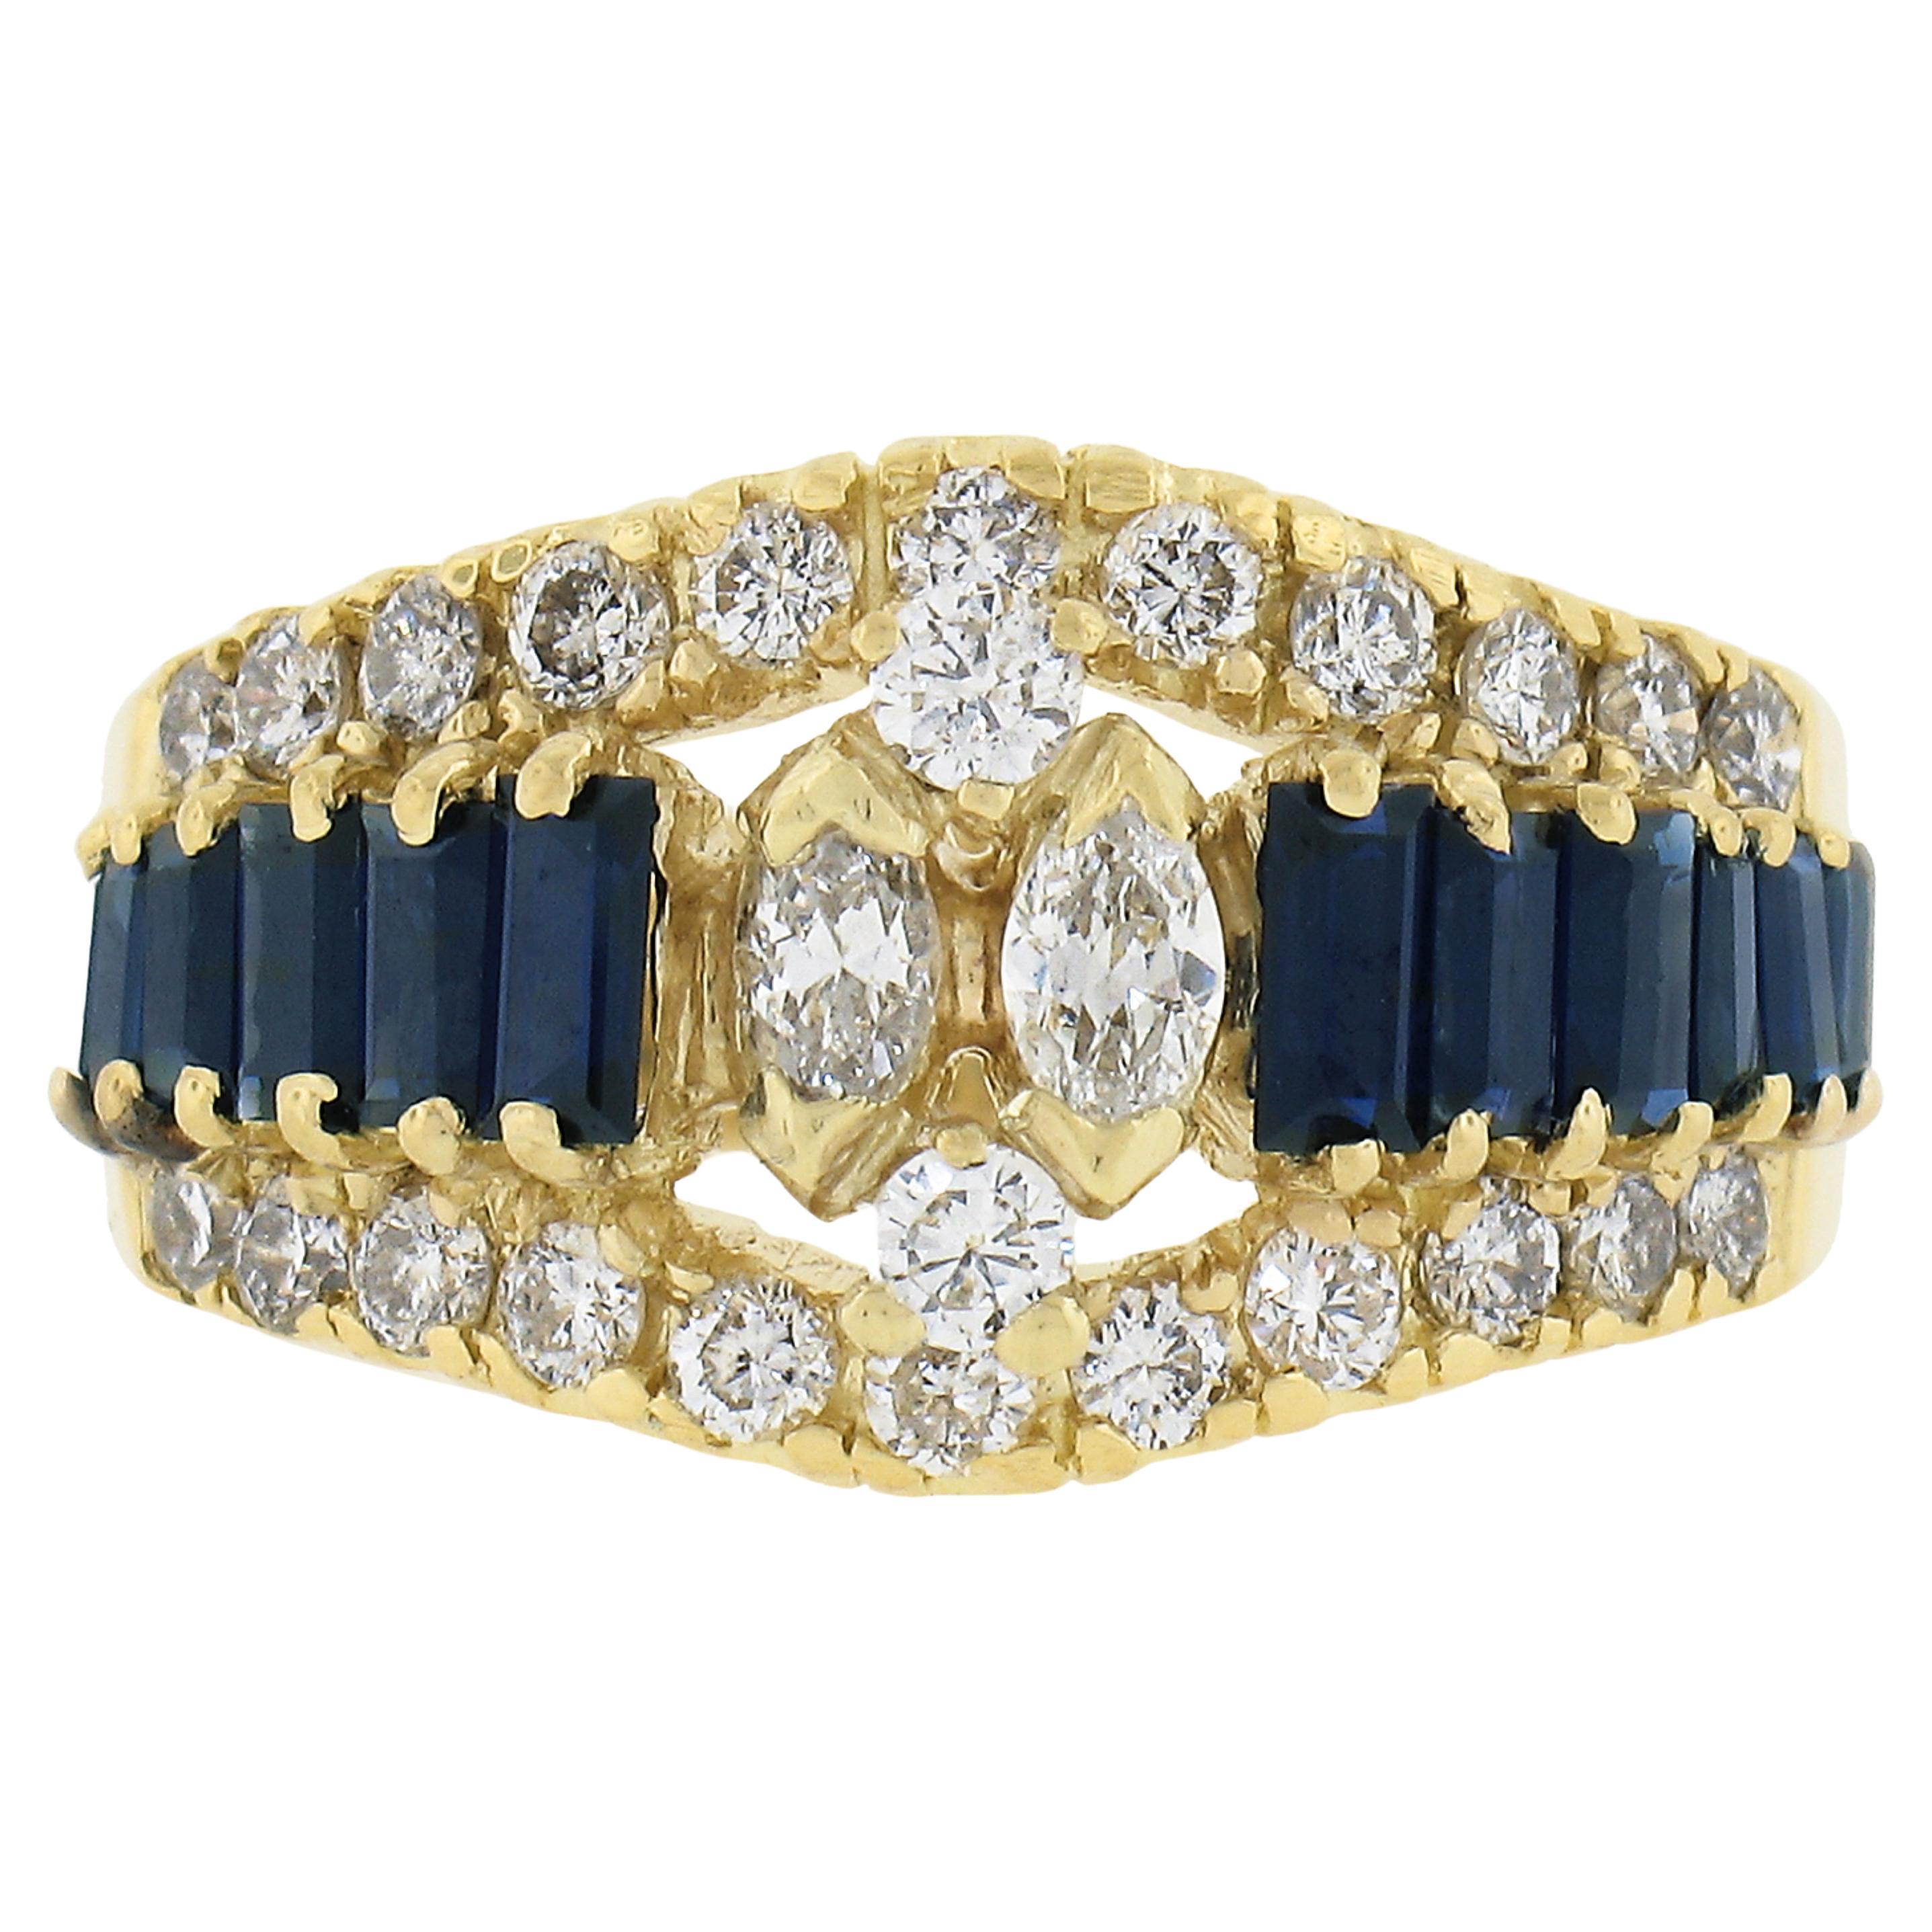 Vintage 18k Yellow Gold 0.75ctw Diamond & Graduated Sapphire Cocktail Band Ring